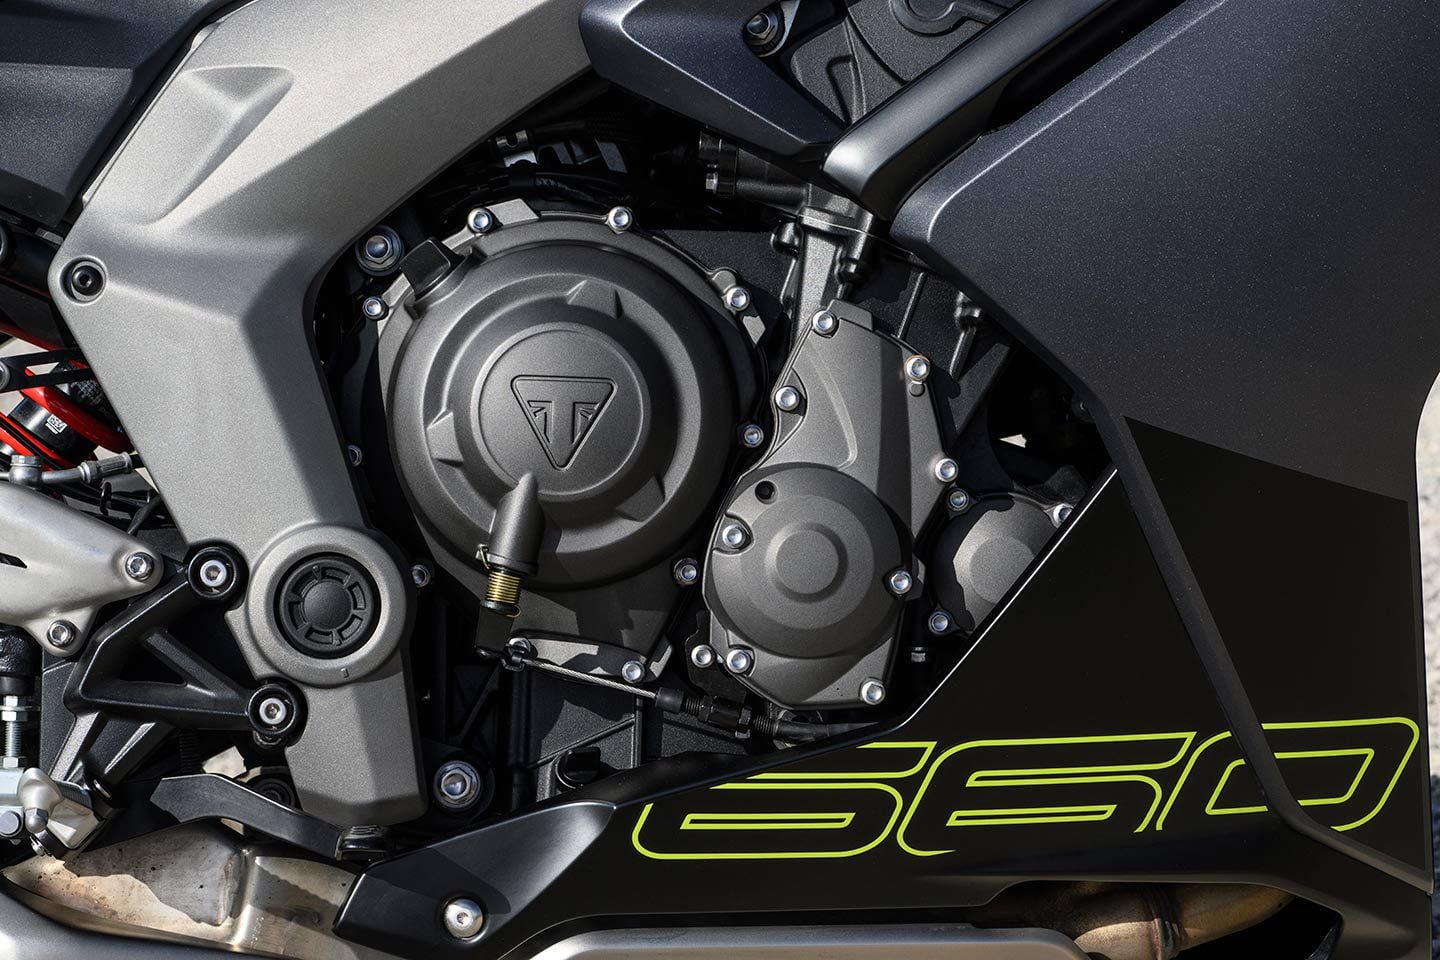 An updated version of Triumph’s 660cc inline-three makes 17 percent more power than the unit in the Trident.